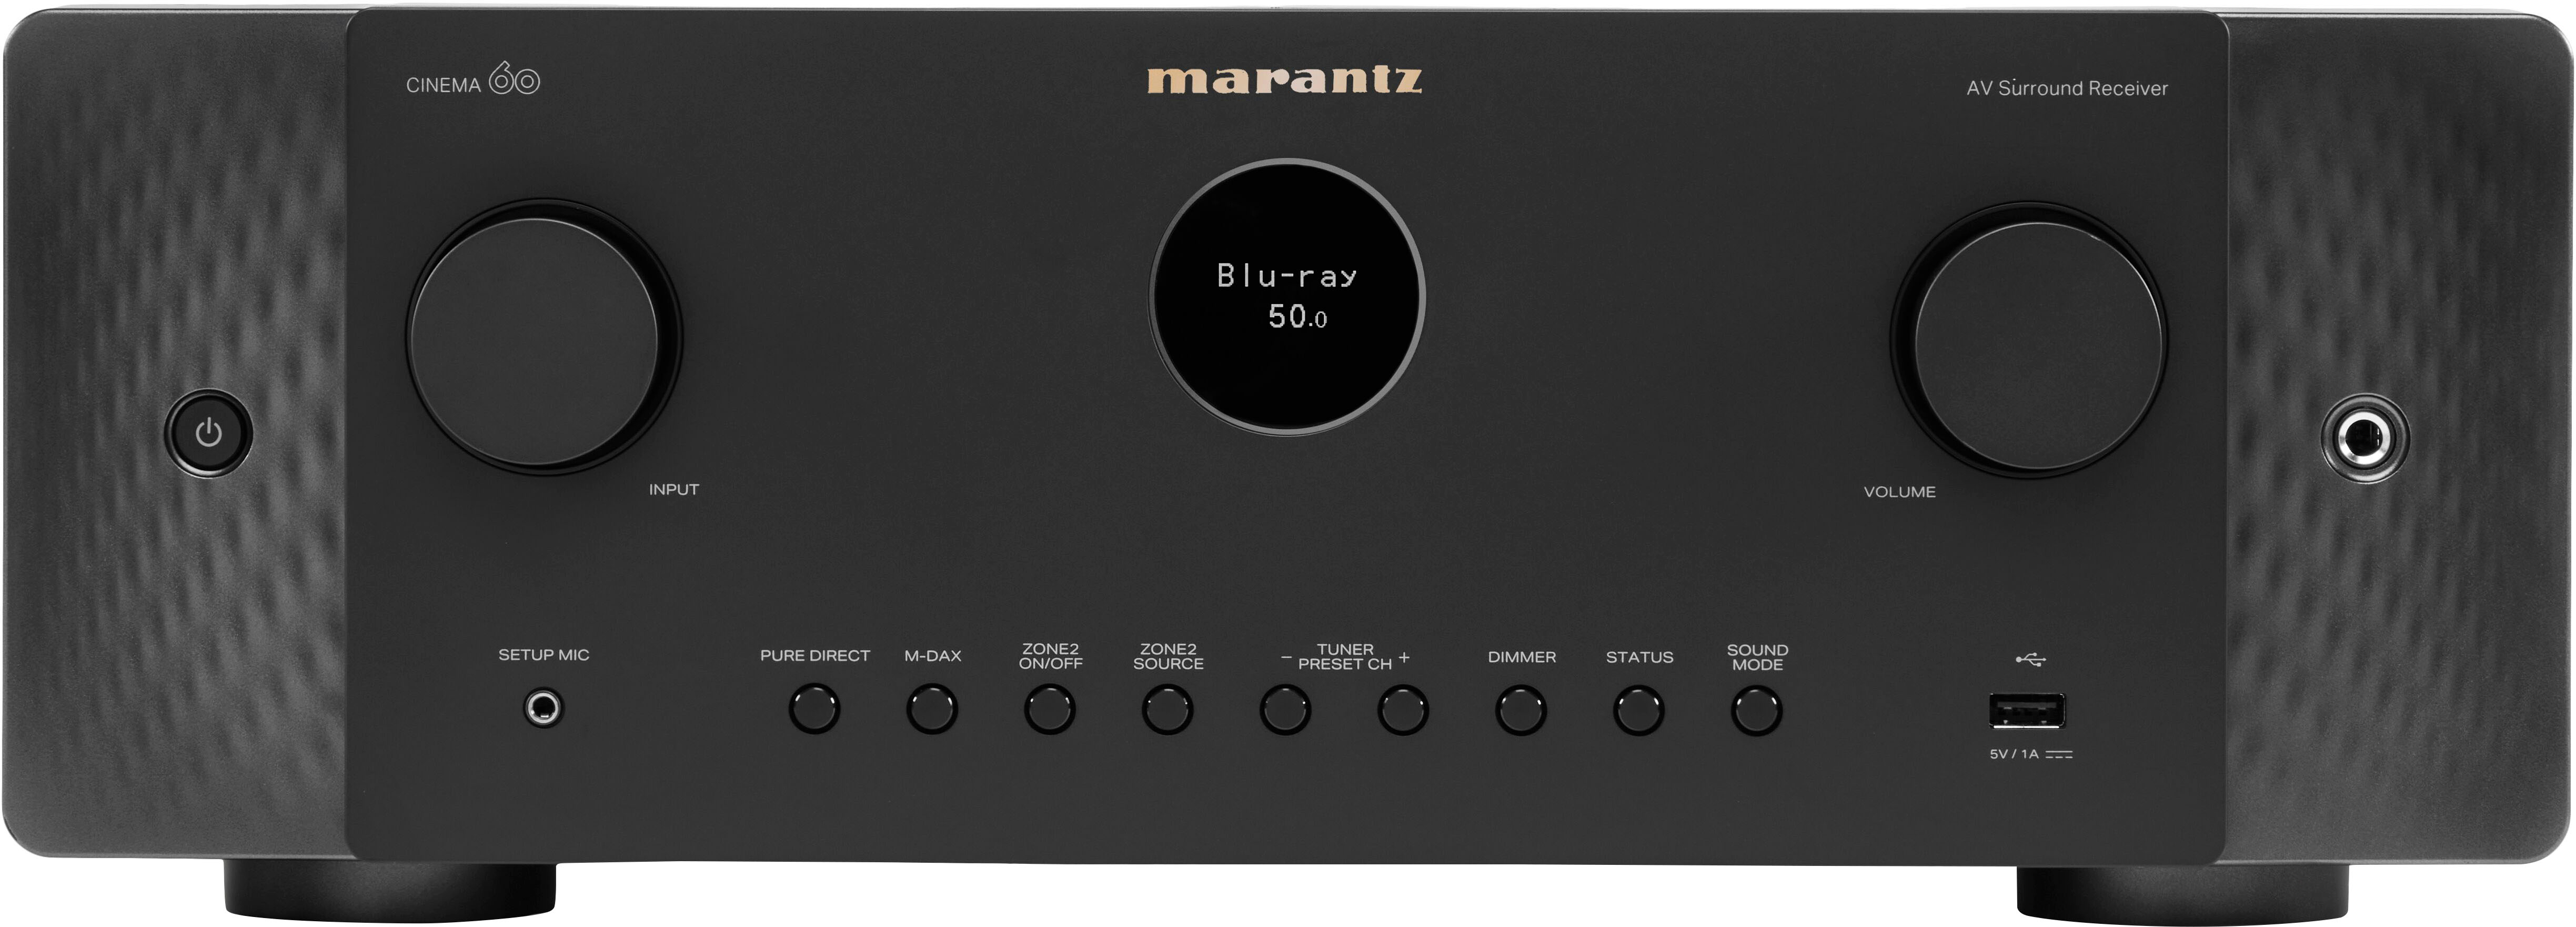 JUST RELEASED! Marantz Stereo 70s 2 Channel A/V Receiver - Classic